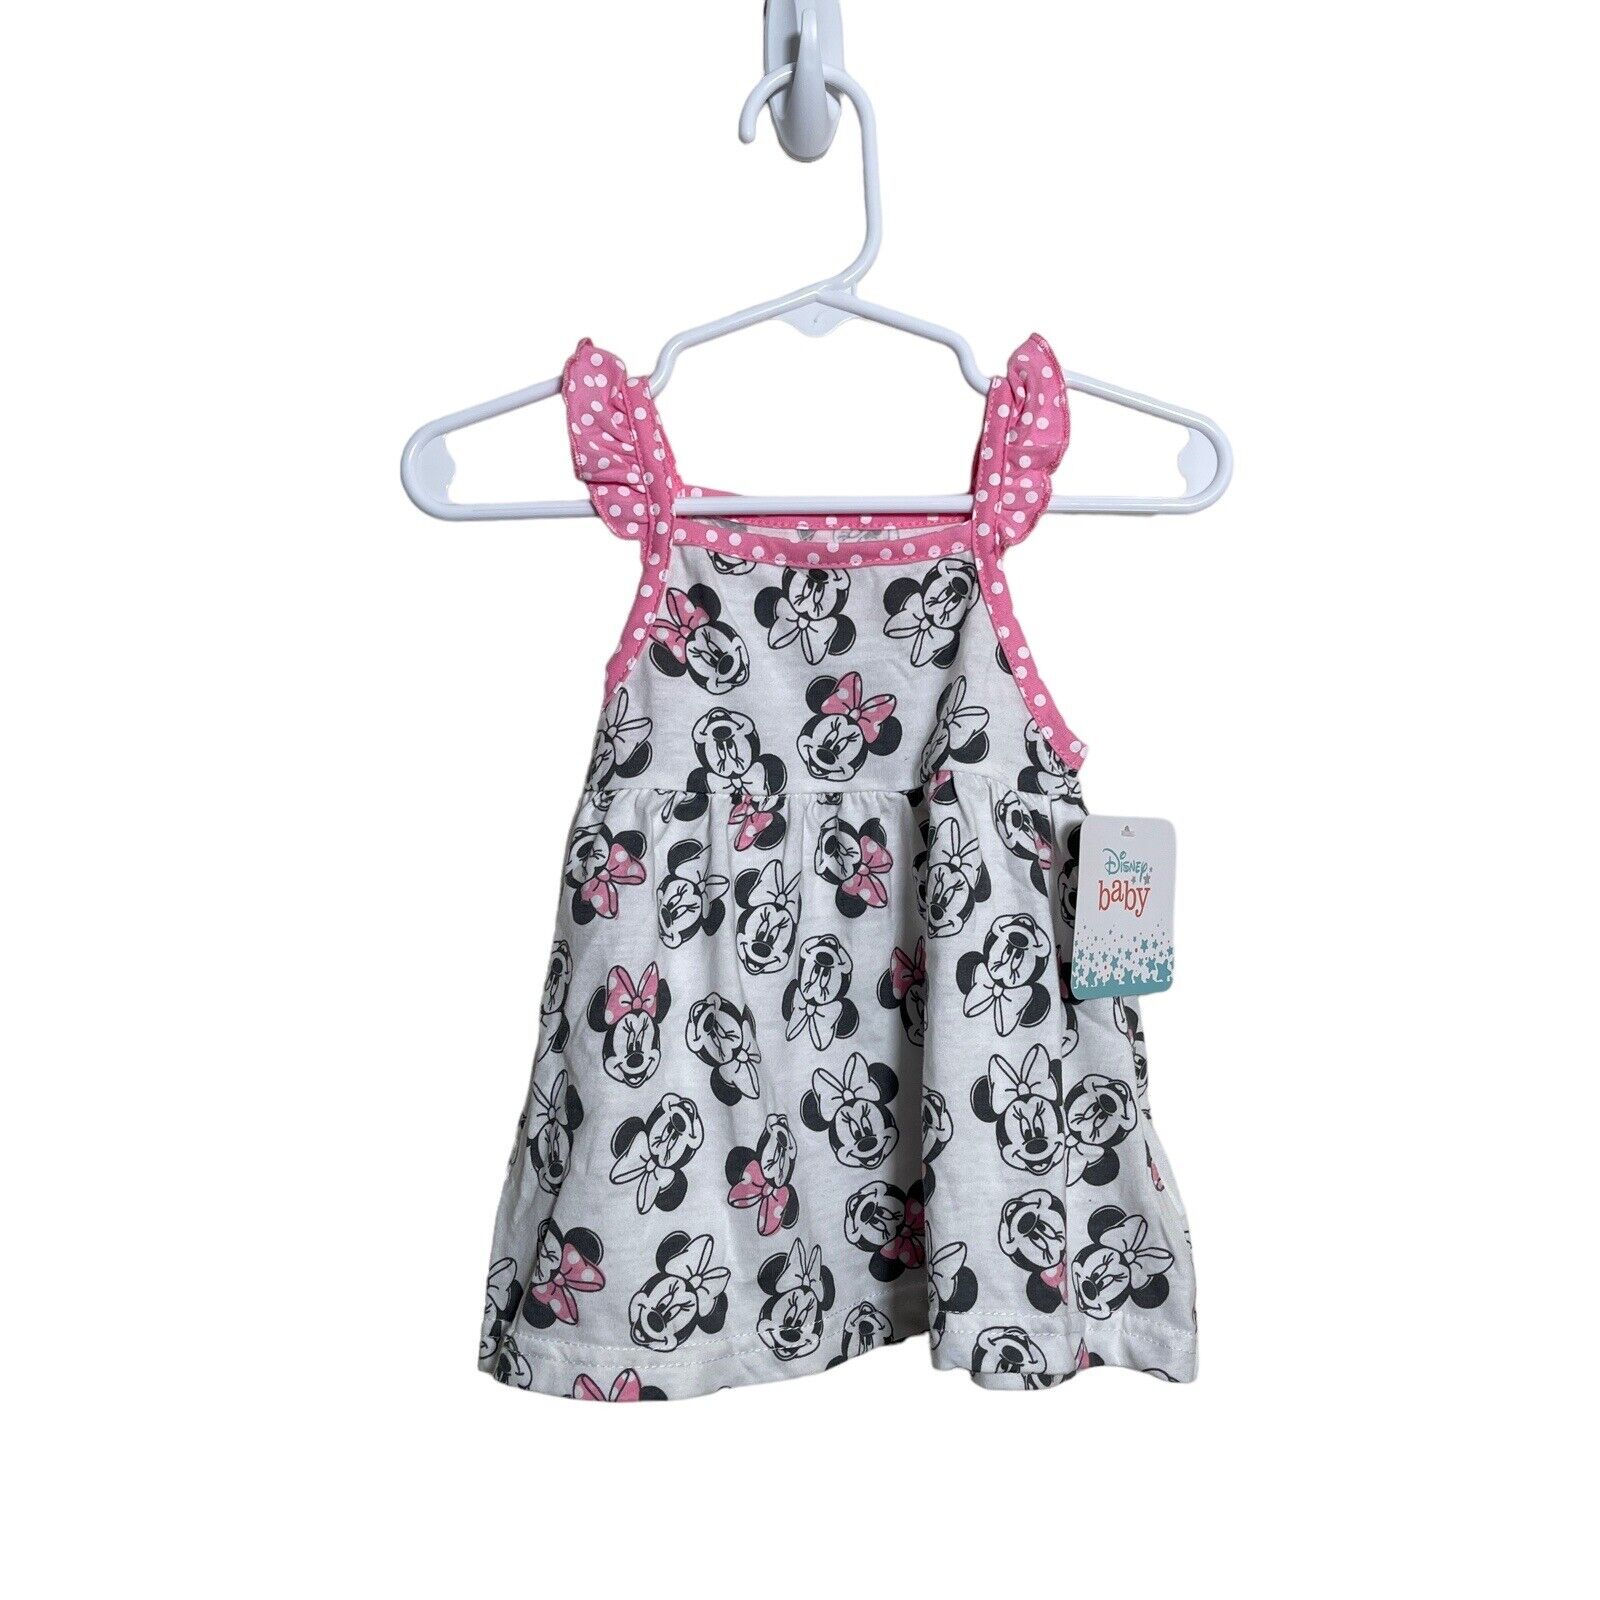 Disney Baby Girl's Dress 3/6 Months Minnie Mouse NWT White Pink